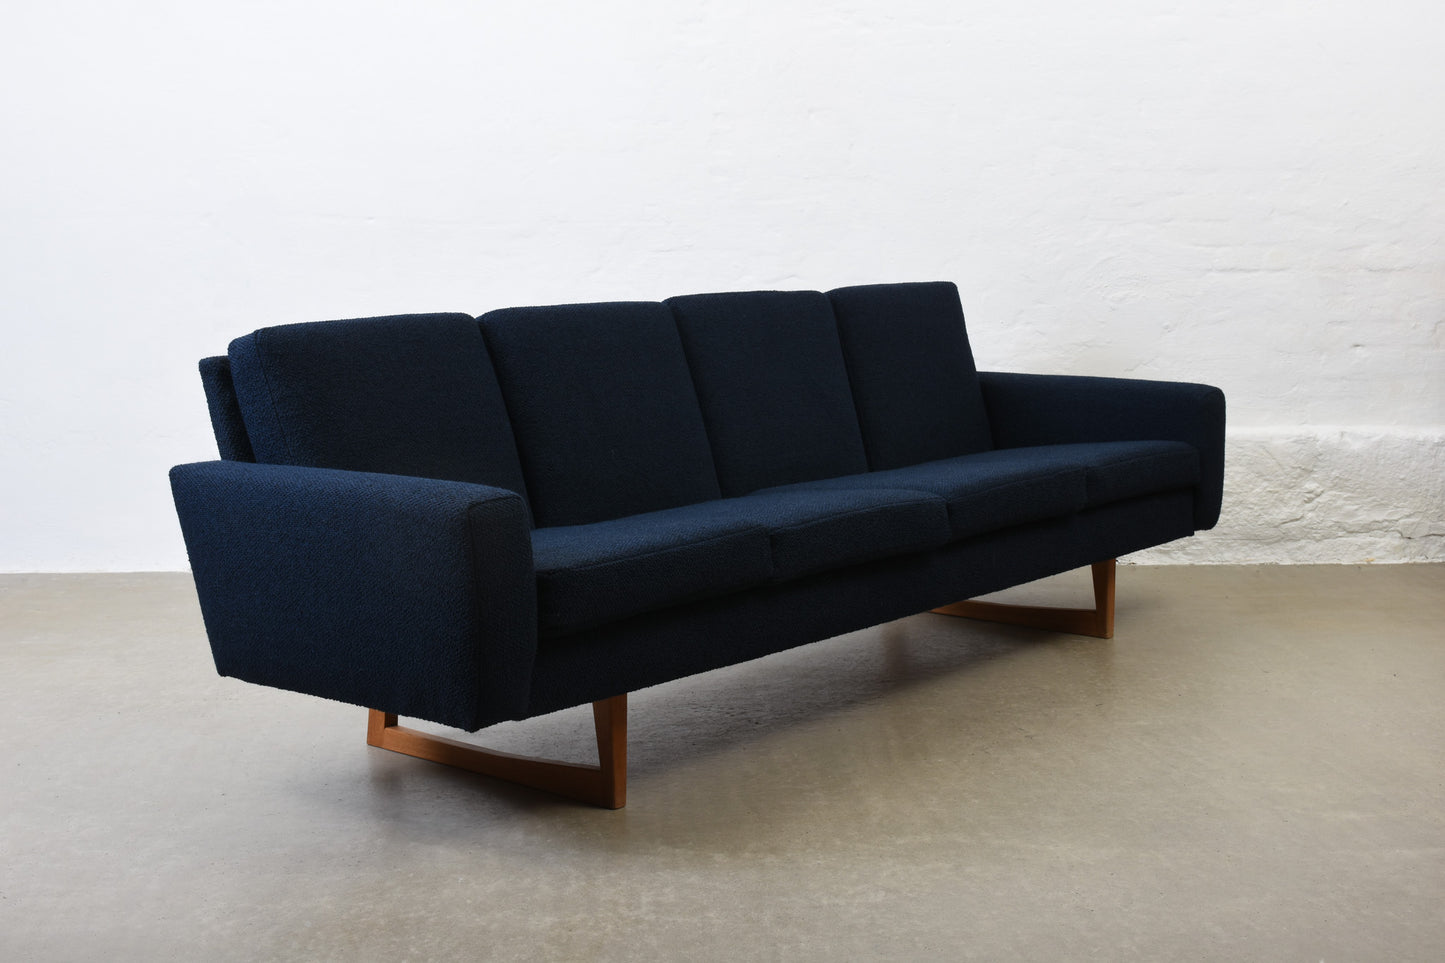 Newly reupholstered: 1960s four seater on oak sleigh legs